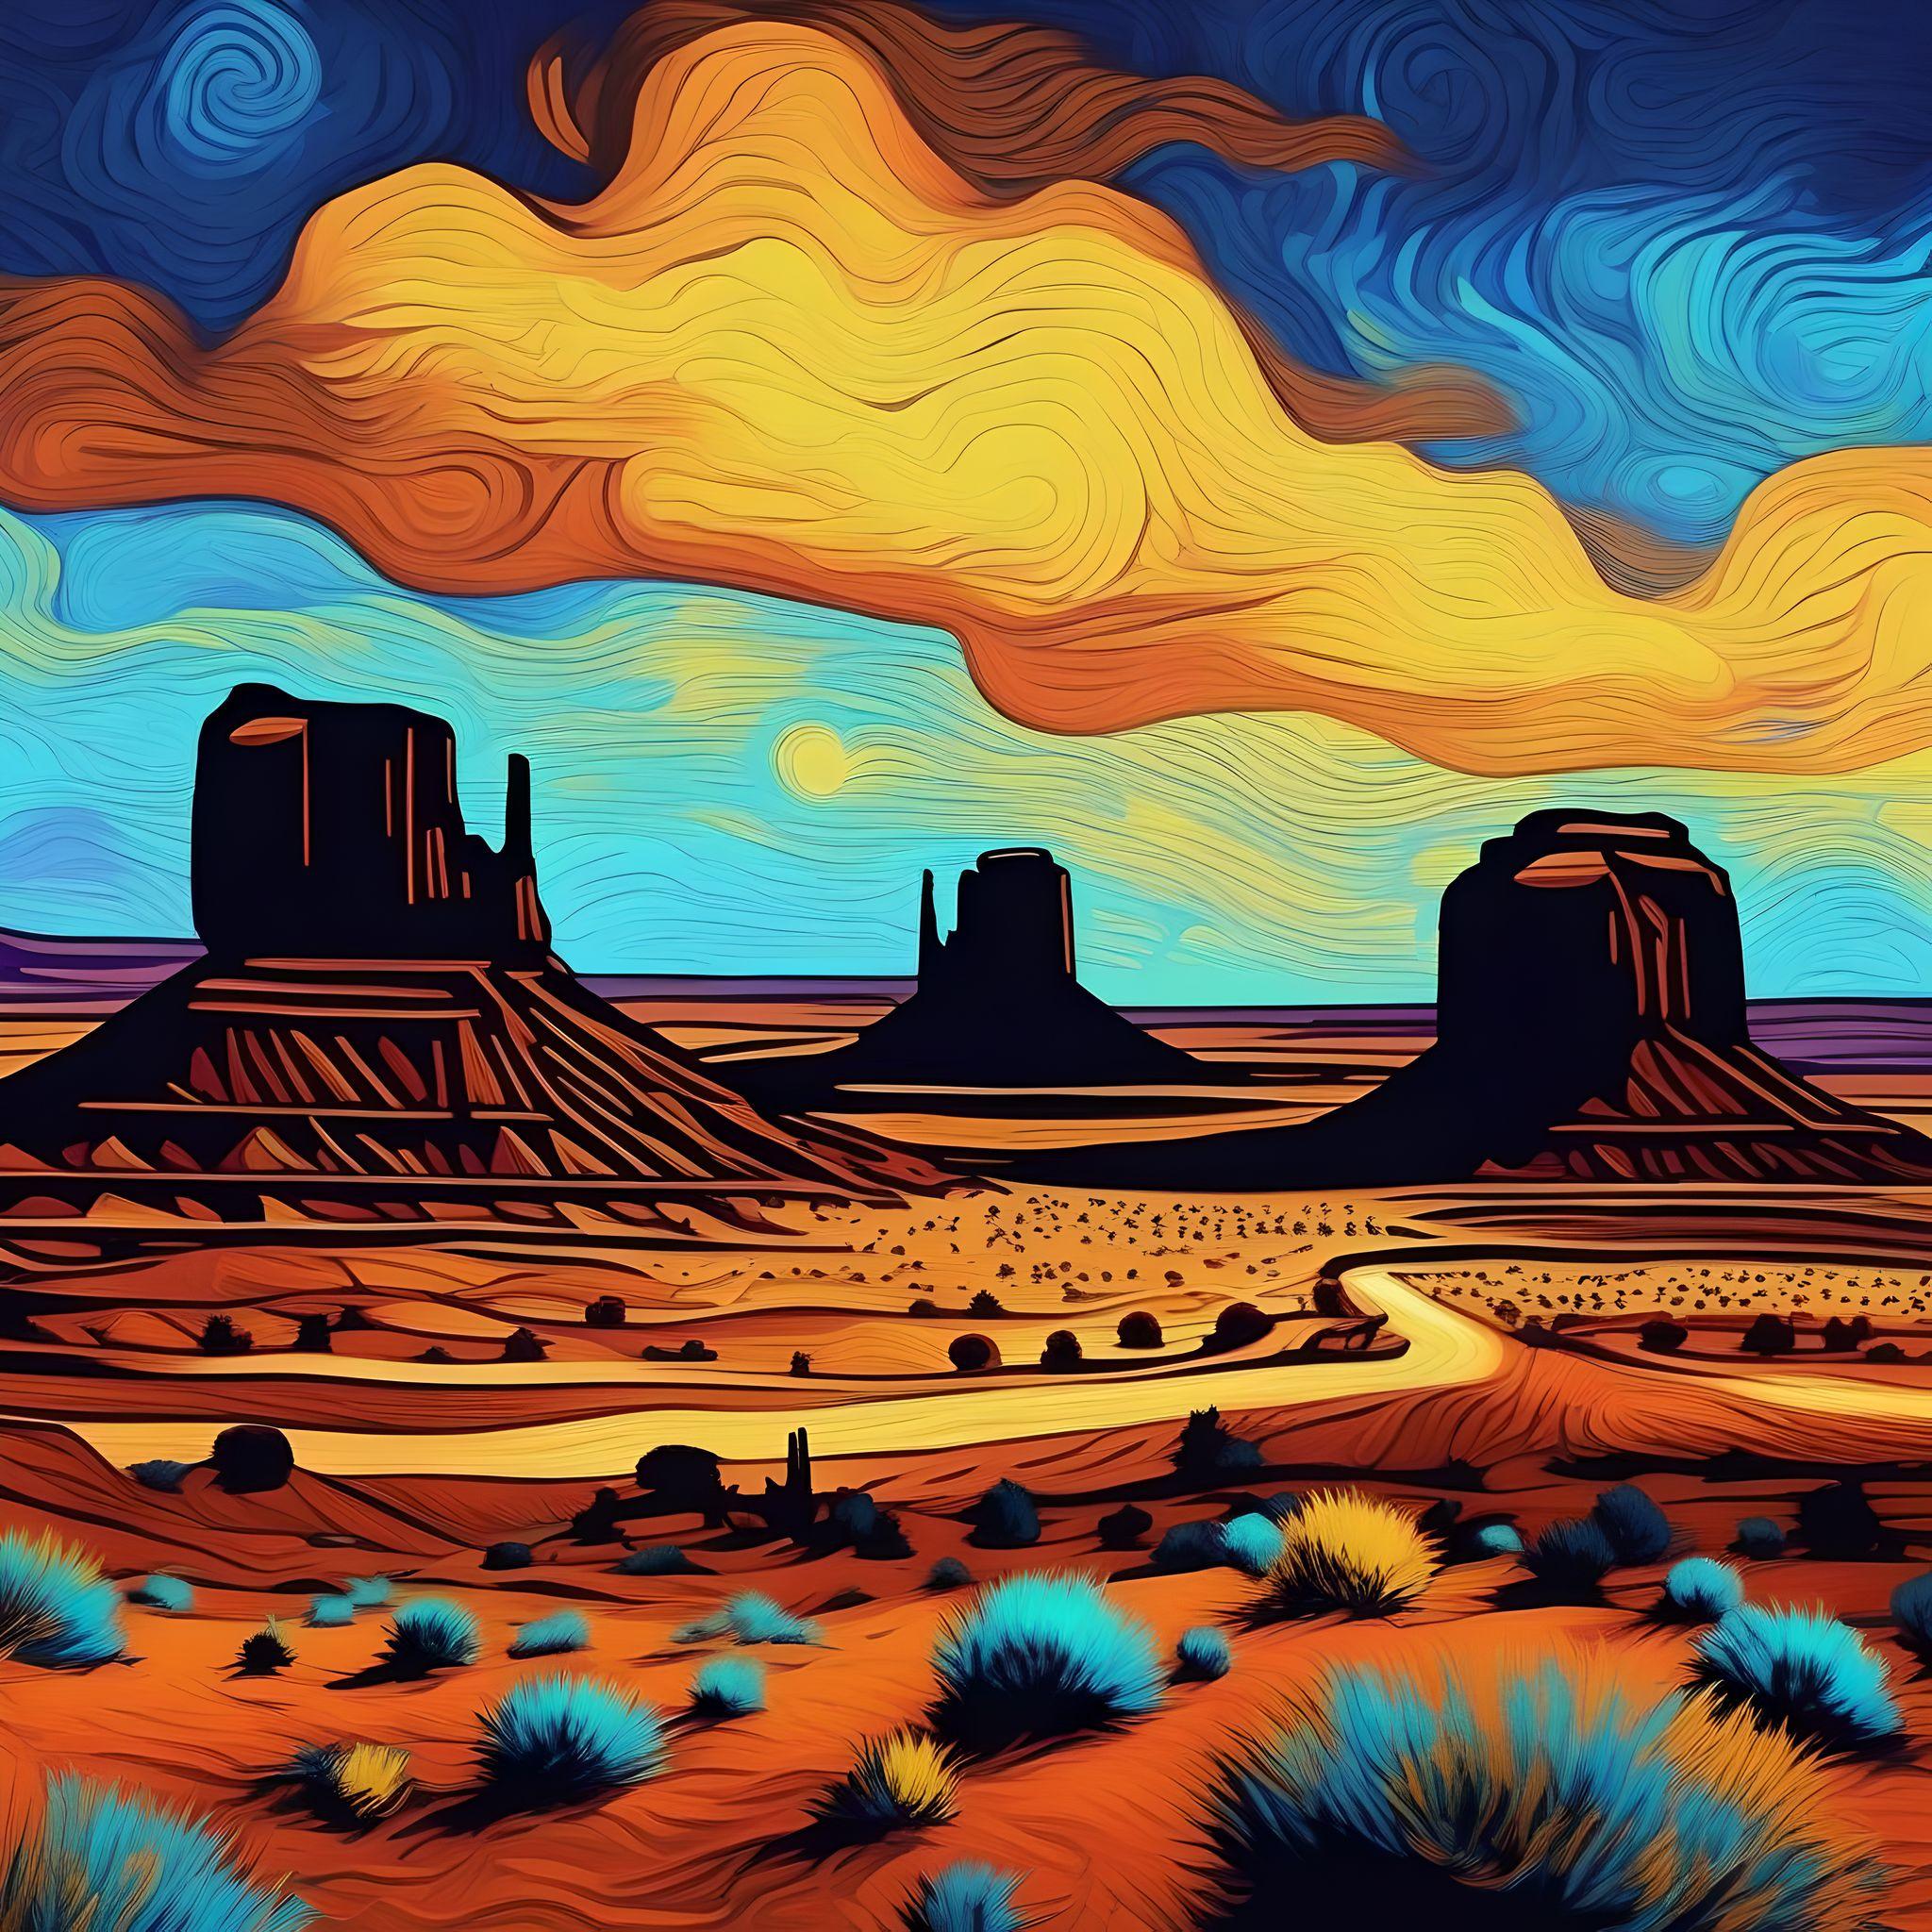 #AIPrompt – Image of Monument Valley, using Psychedelic Color, in the Style of Vincent van Gogh